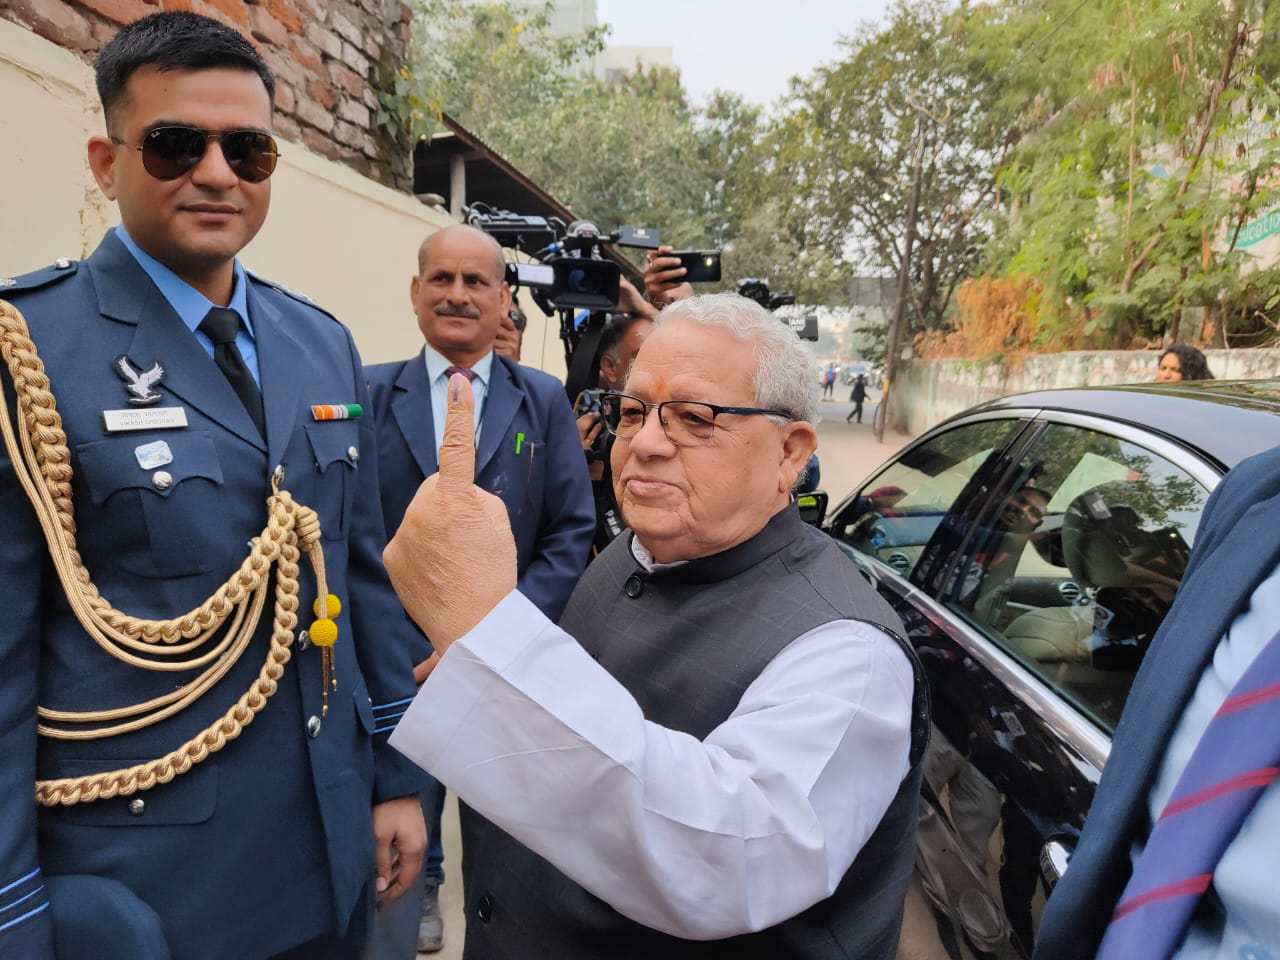 Hon'ble Governor showing his inked finger after casting his vote and appealed to voters to vote in large numbers